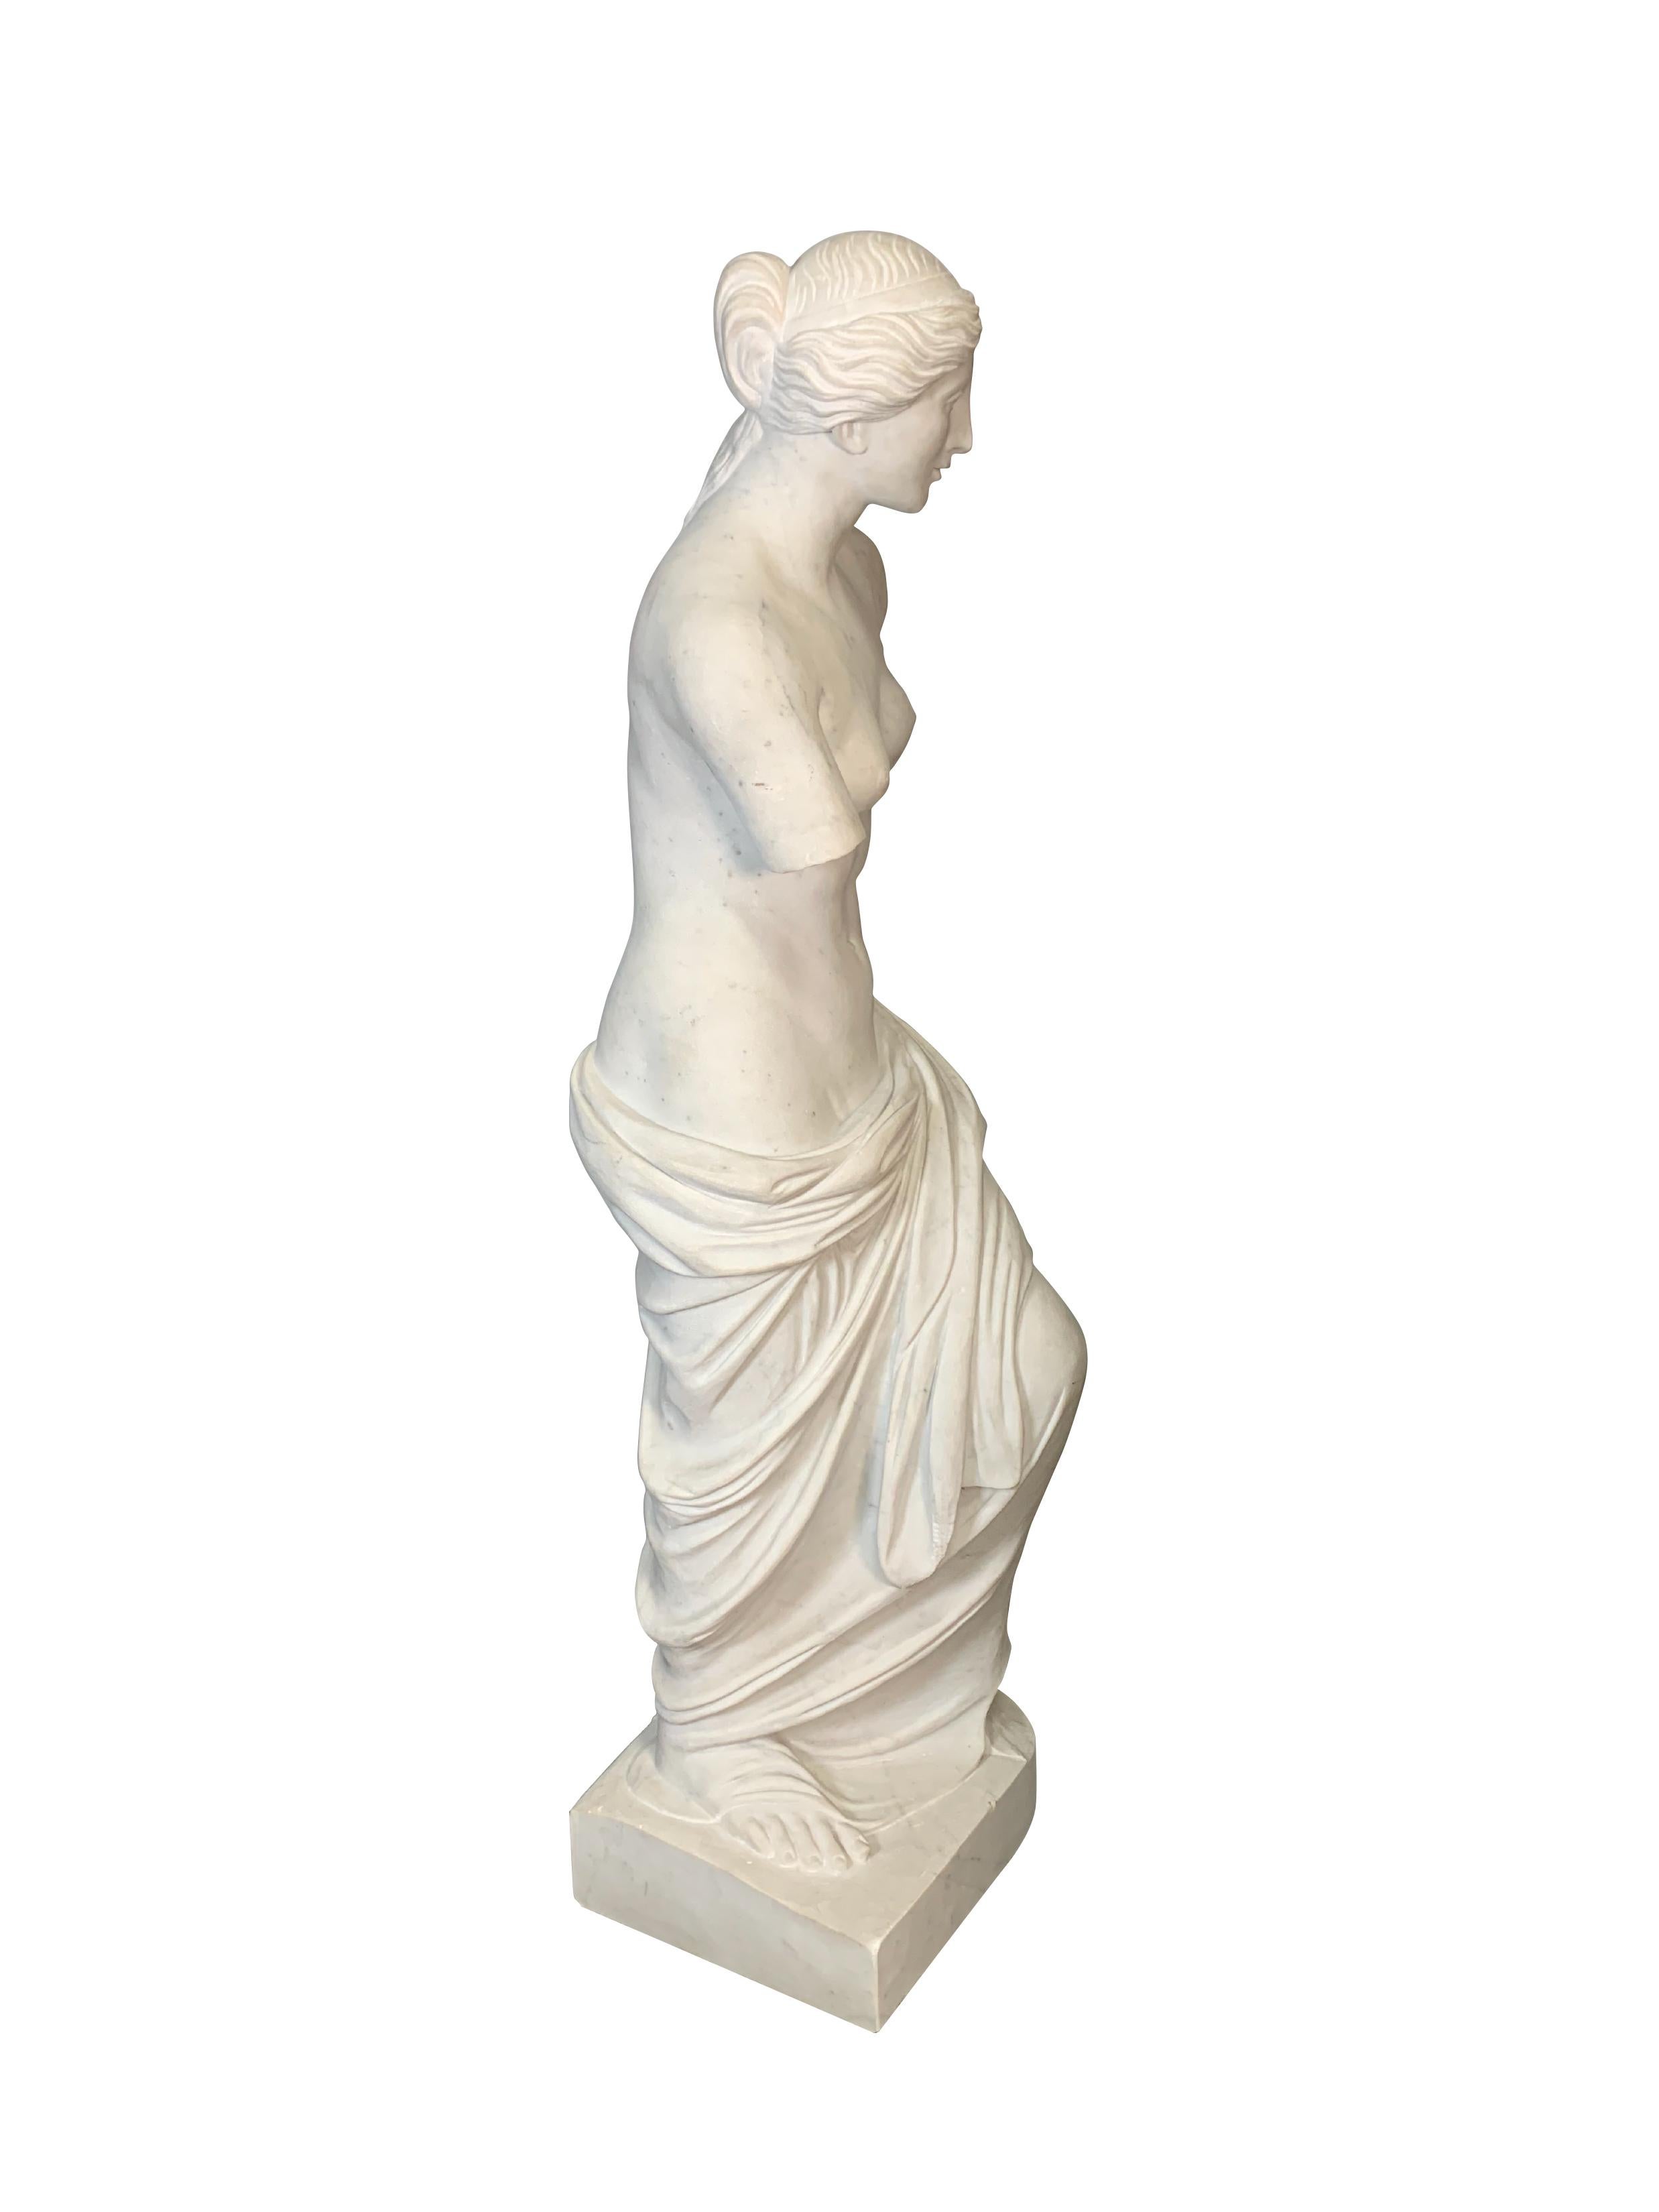 This elegant Italian hand carved marble figure was made on early 20th century, and is a copy of the famous Venus De Milo marble sculpture (Aphoride of Milos in Greek), goddess of love and beauty. The original statue is one of the most famous pieces